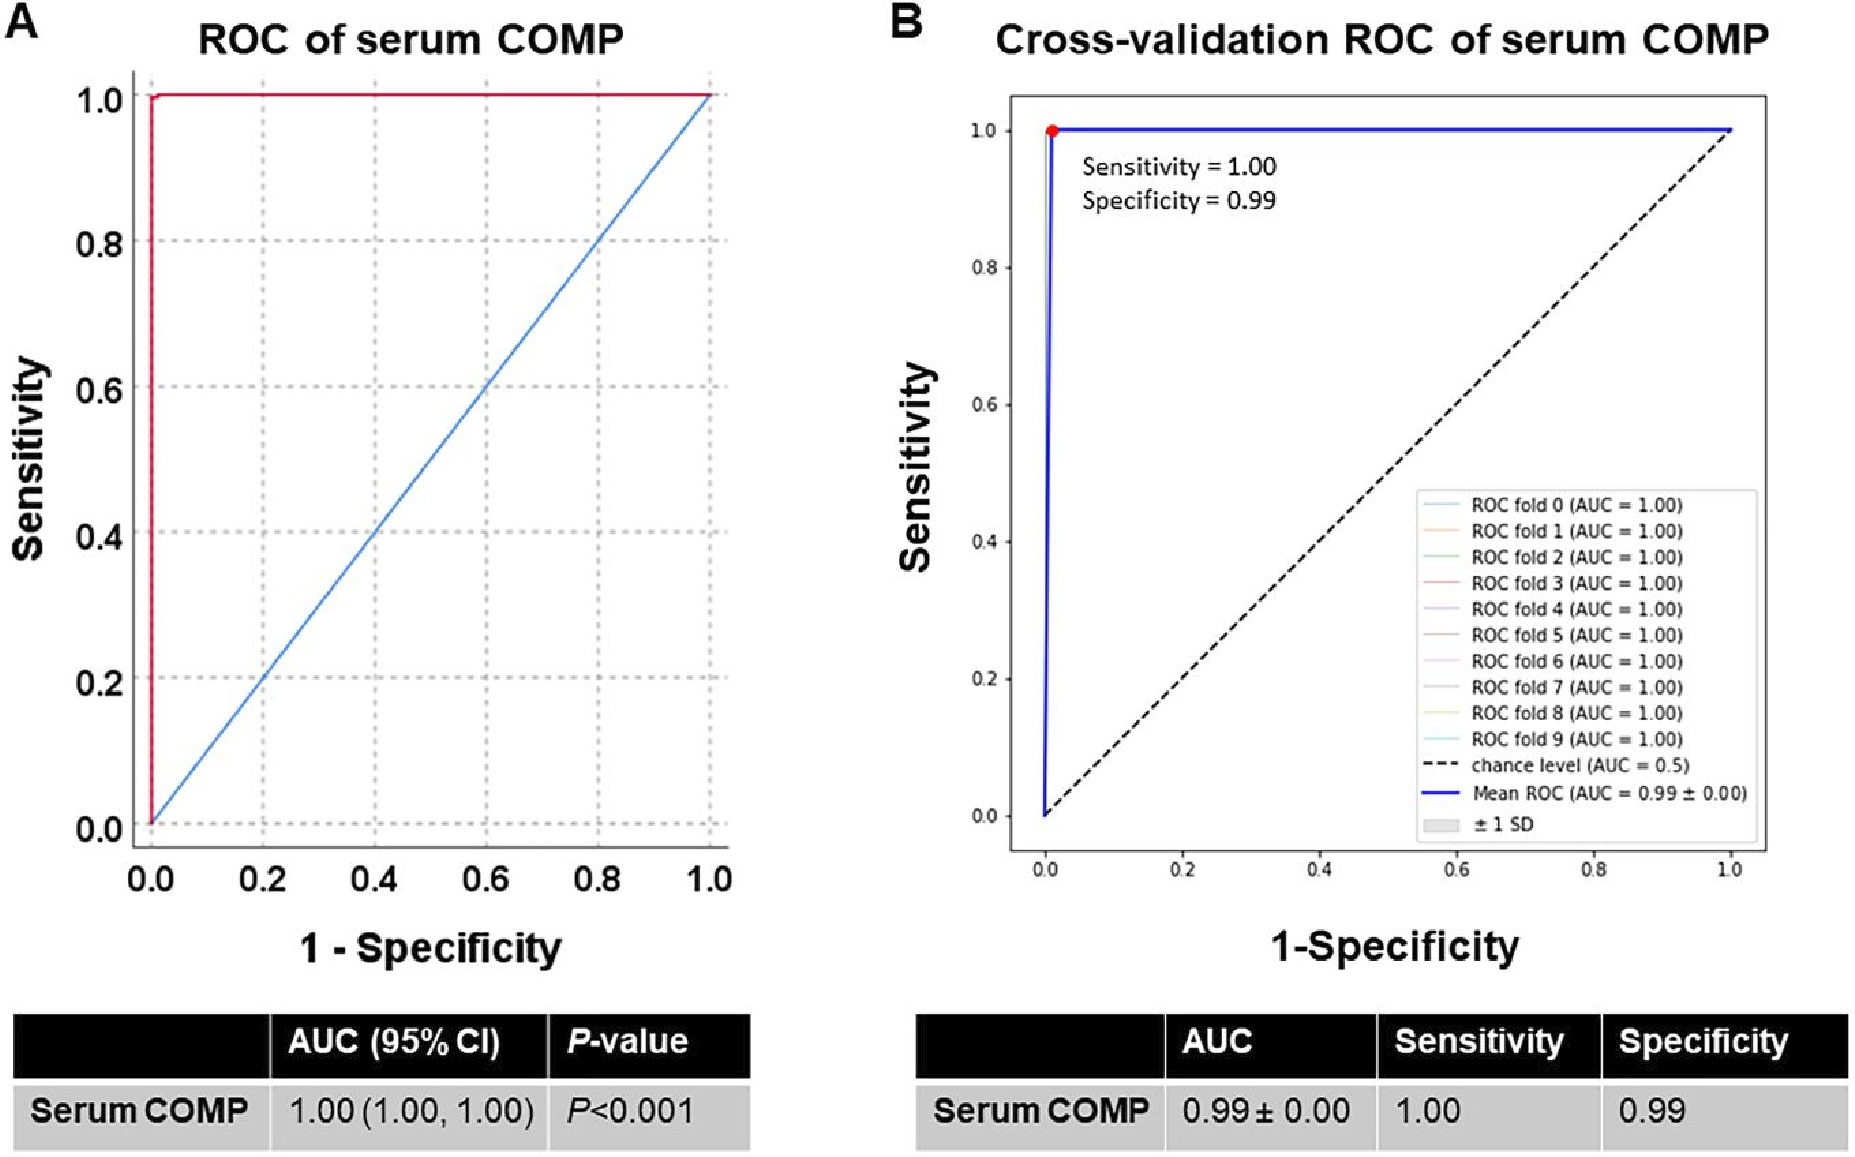 Fig. 3 
            Diagnostic value of serum cartilage oligomeric matrix protein (COMP) as a biomarker of knee osteoarthritis (OA). a) Receiver operating characteristic (ROC) curve displaying serum COMP as a biomarker for differentiating knee OA patients from healthy controls. b) ROC curve with ten-fold cross-validation displaying the reliability of serum COMP as a knee OA biomarker. AUC, area under the curve; CI, confidence interval; SD, standard deviation.
          